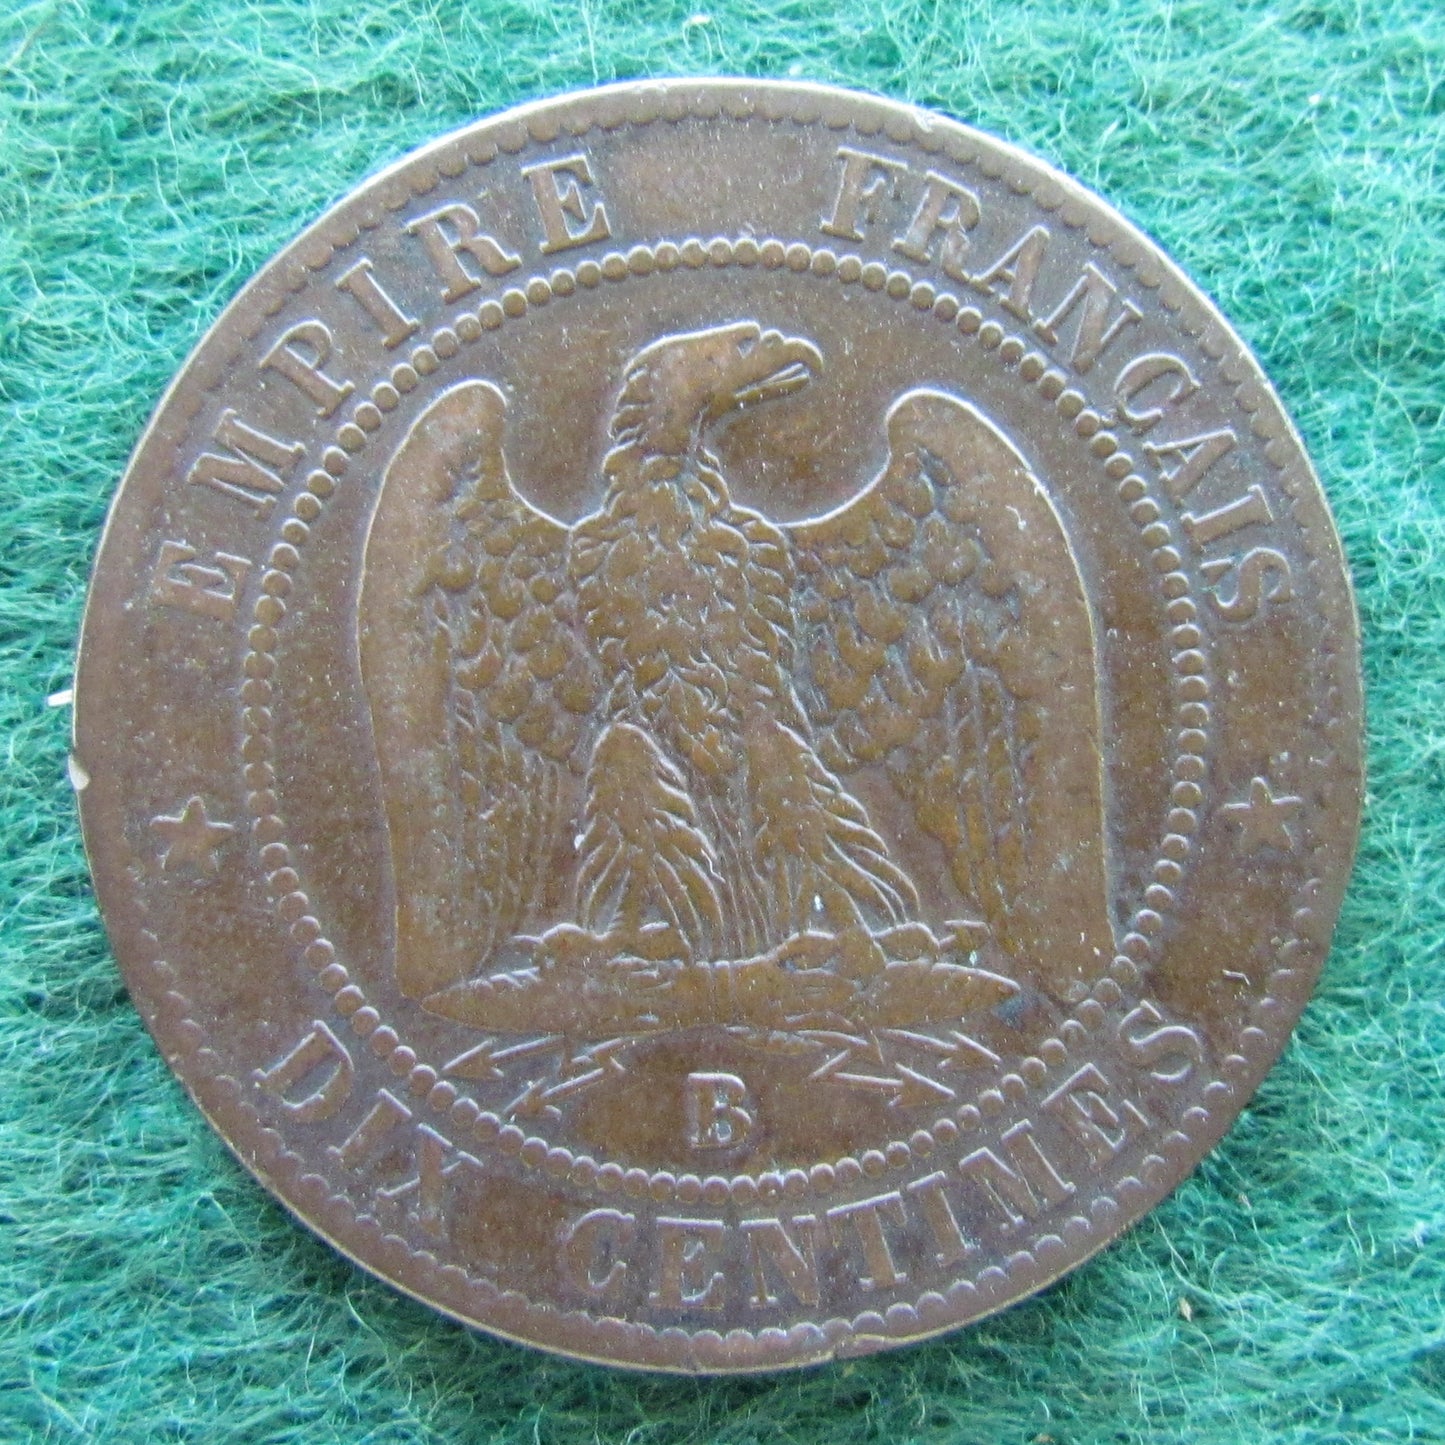 French 1856 B 10 Centimes Napoleon III Coin - Circulated